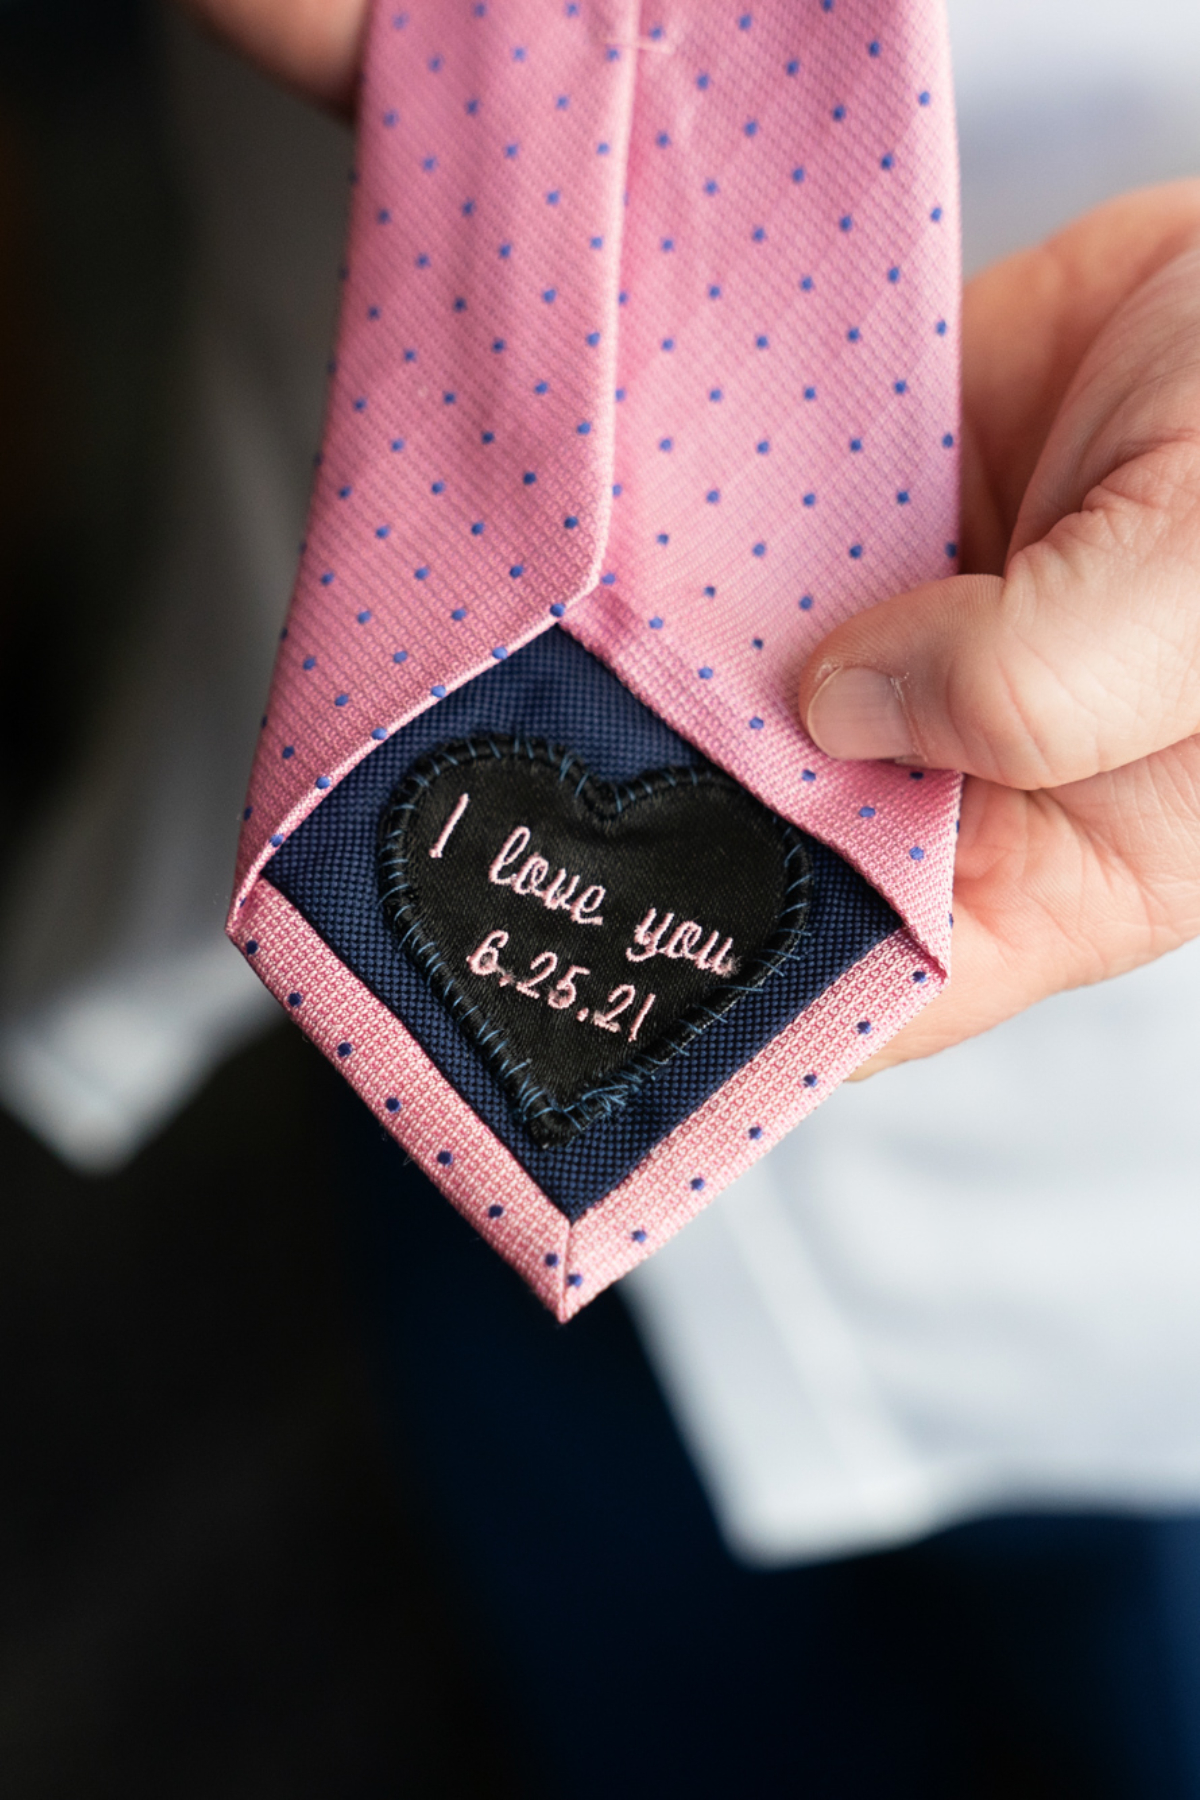 closeup of grooms tie embroidered with wedding date